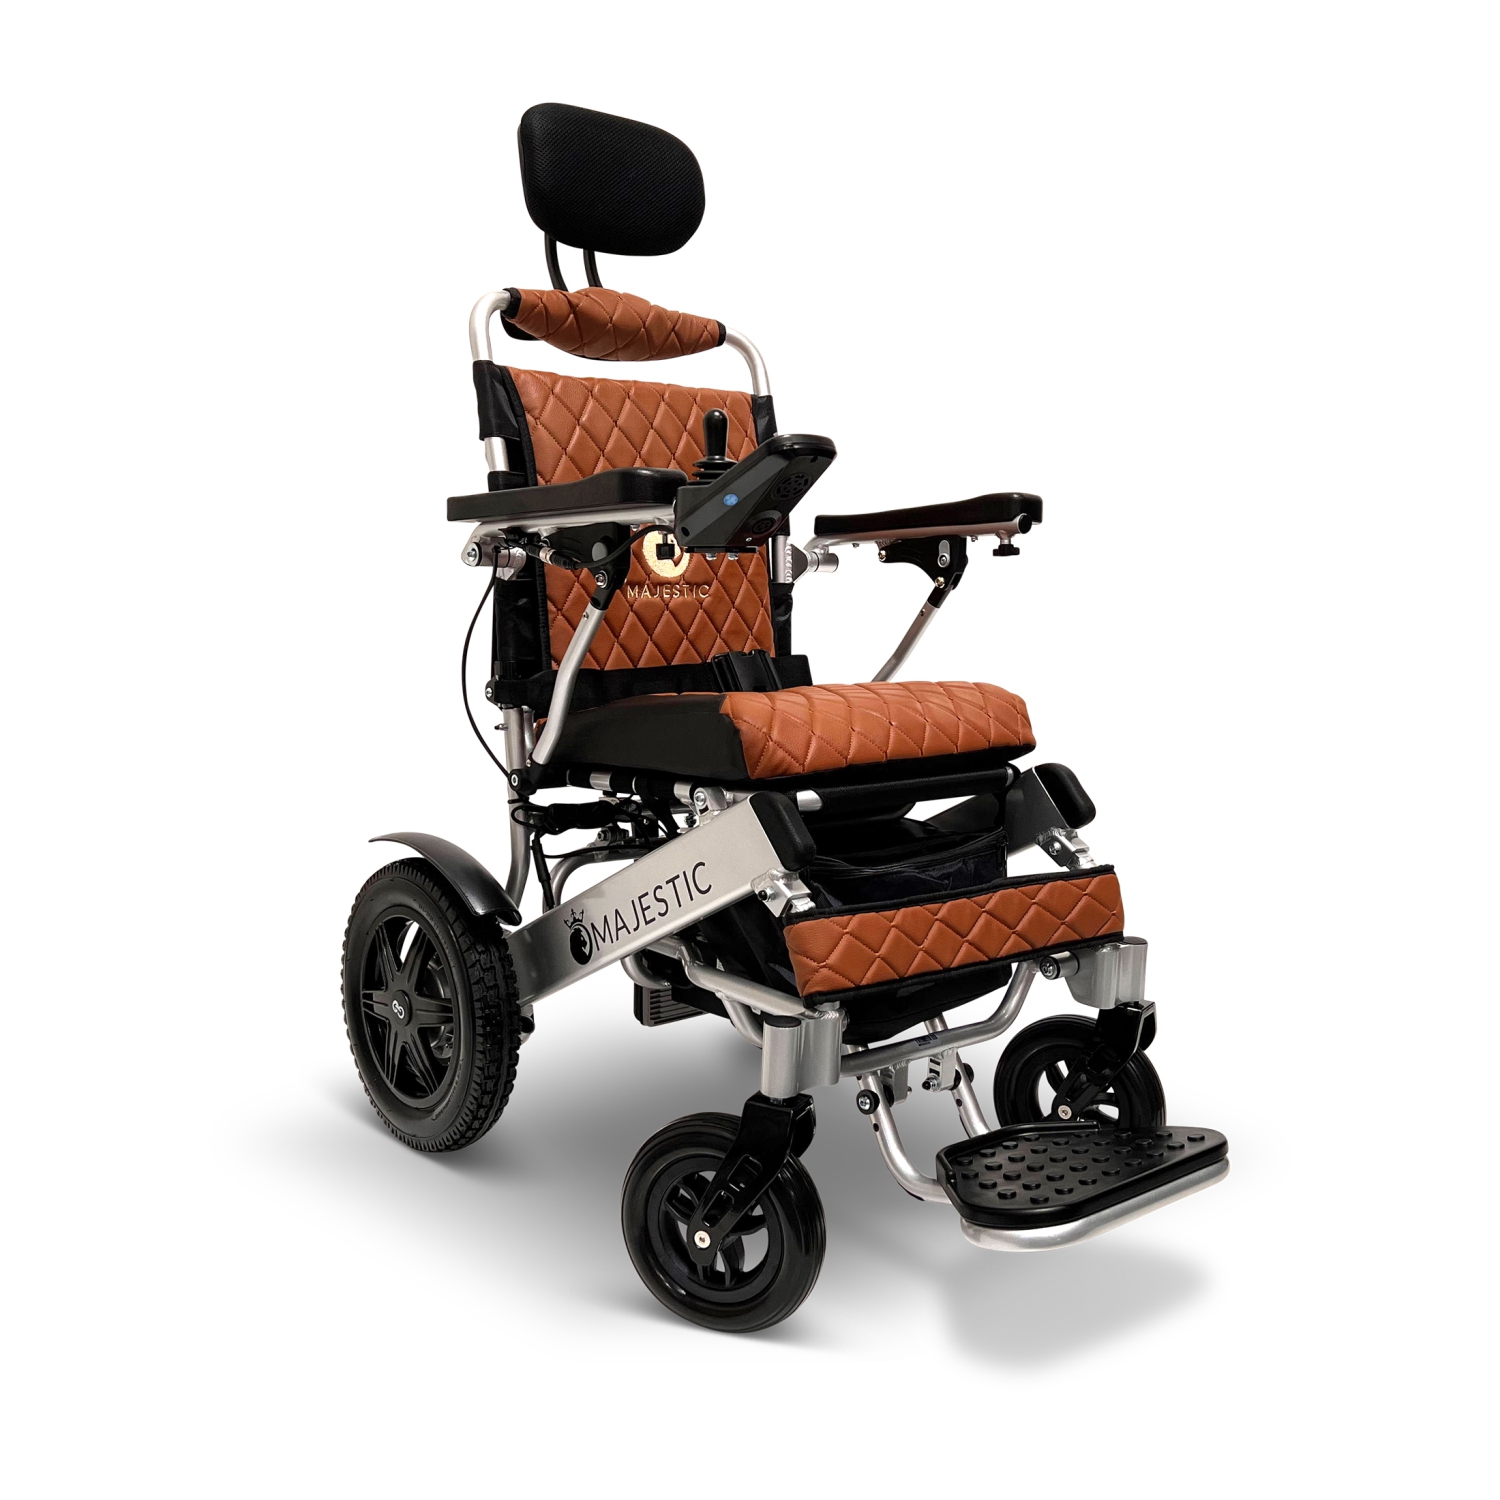 MAJESTIC IQ-9000 Airline Approved Luxury Electric Wheelchair | Auto Recline, LCD Joystick, Foldable, Up to 30 KM Range, Ultra-Light | 17’’ Seat Width, Silver Frame, Taba Textile